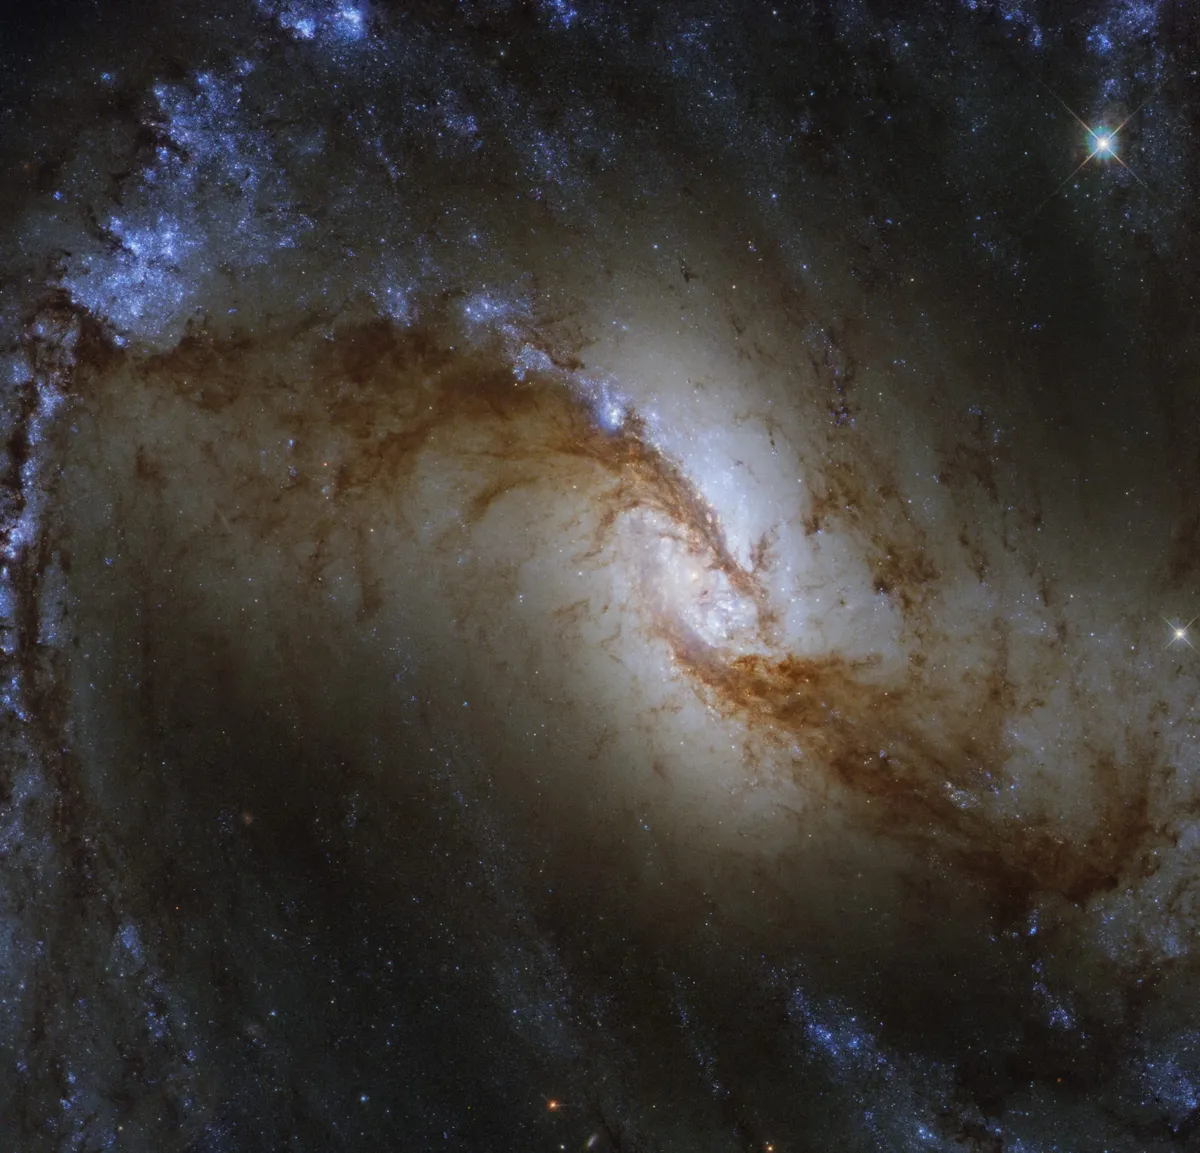 Great Barred Spiral Galaxy NGC 1365, captured by the Hubble Space Telescope. Credit: Credit: ESA/Hubble & NASA, J. Lee and the PHANGS-HST Team Acknowledgement: Judy Schmidt (Geckzilla)